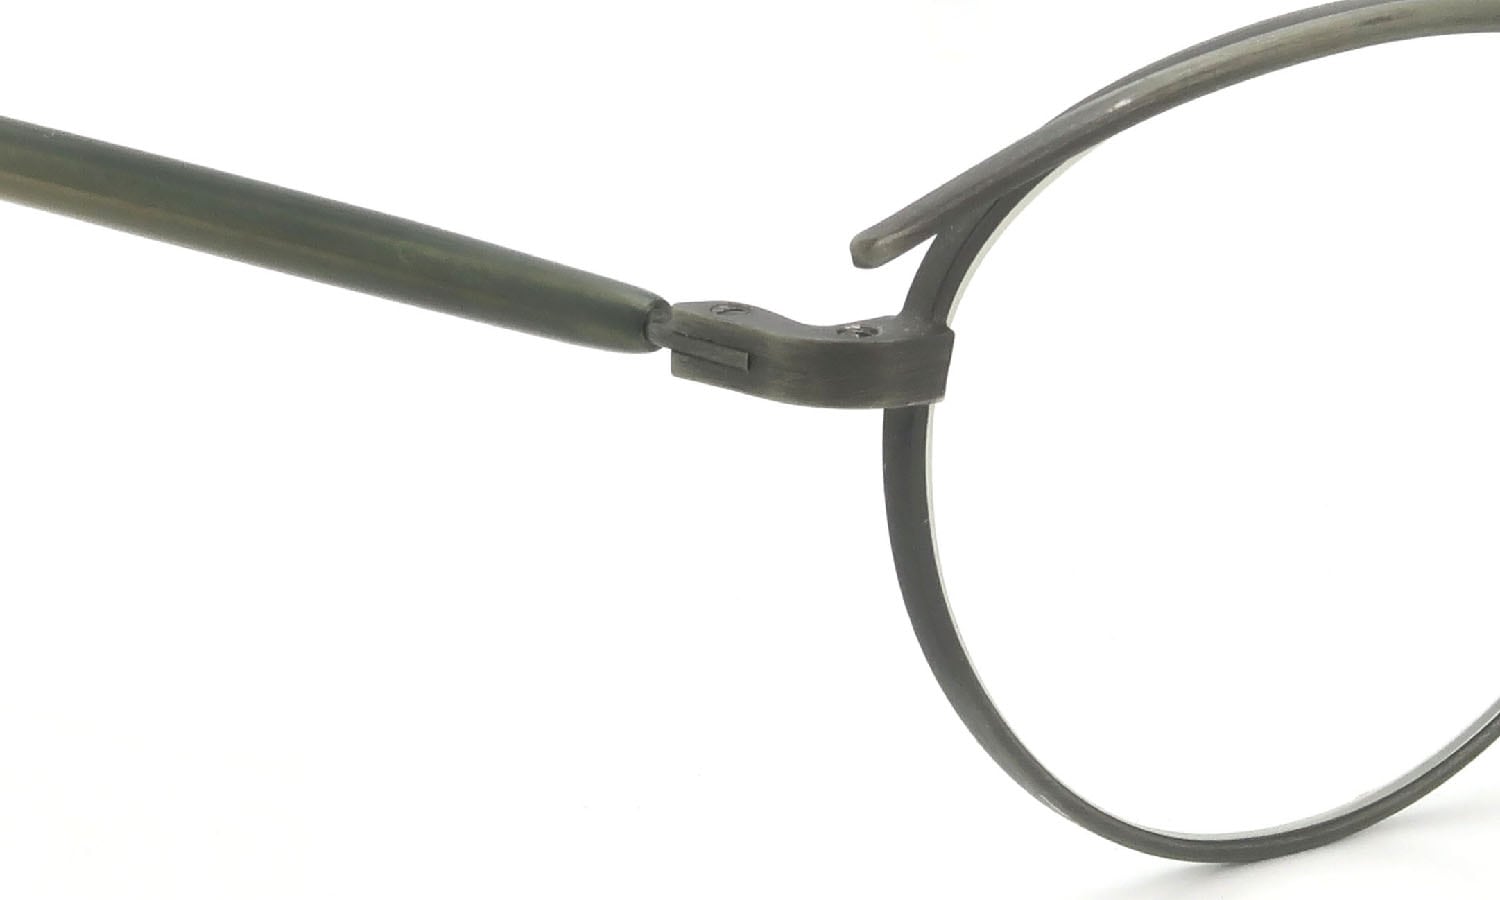 OLIVER PEOPLES 1990's OP-6 GR-986 with Clip